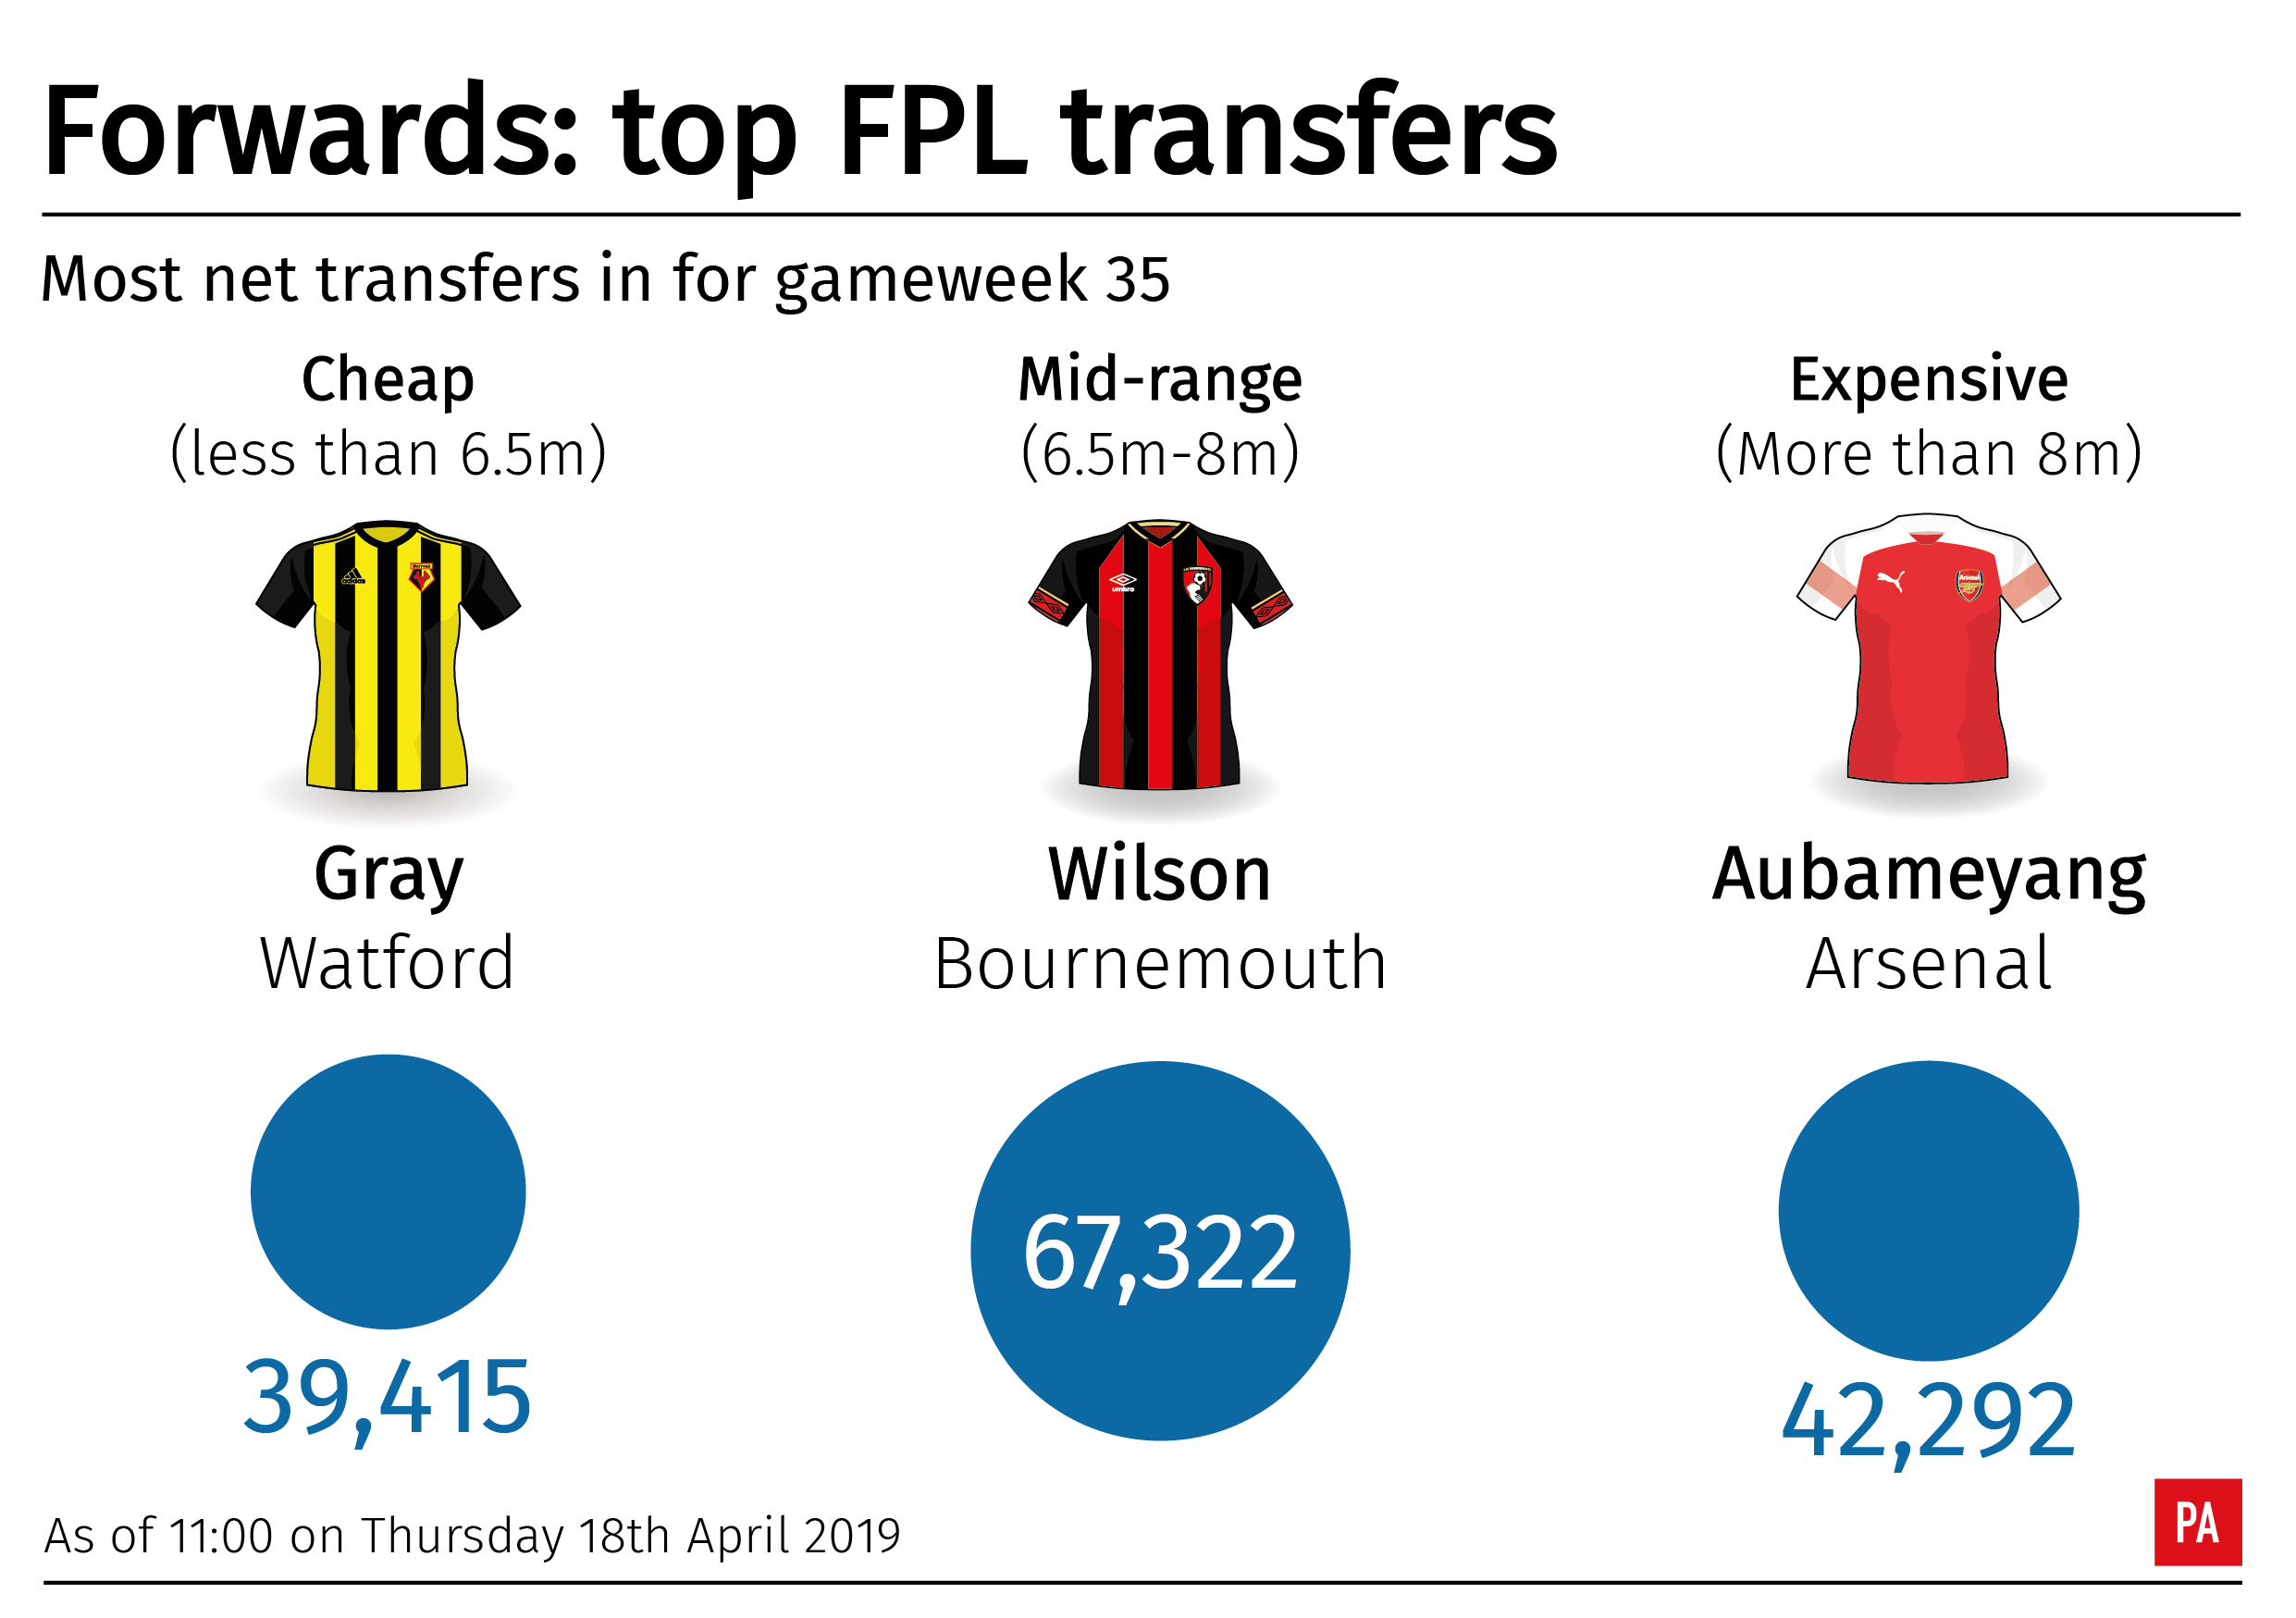 Three of the most popular forwards for Fantasy Premier League managers ahead of gameweek 35